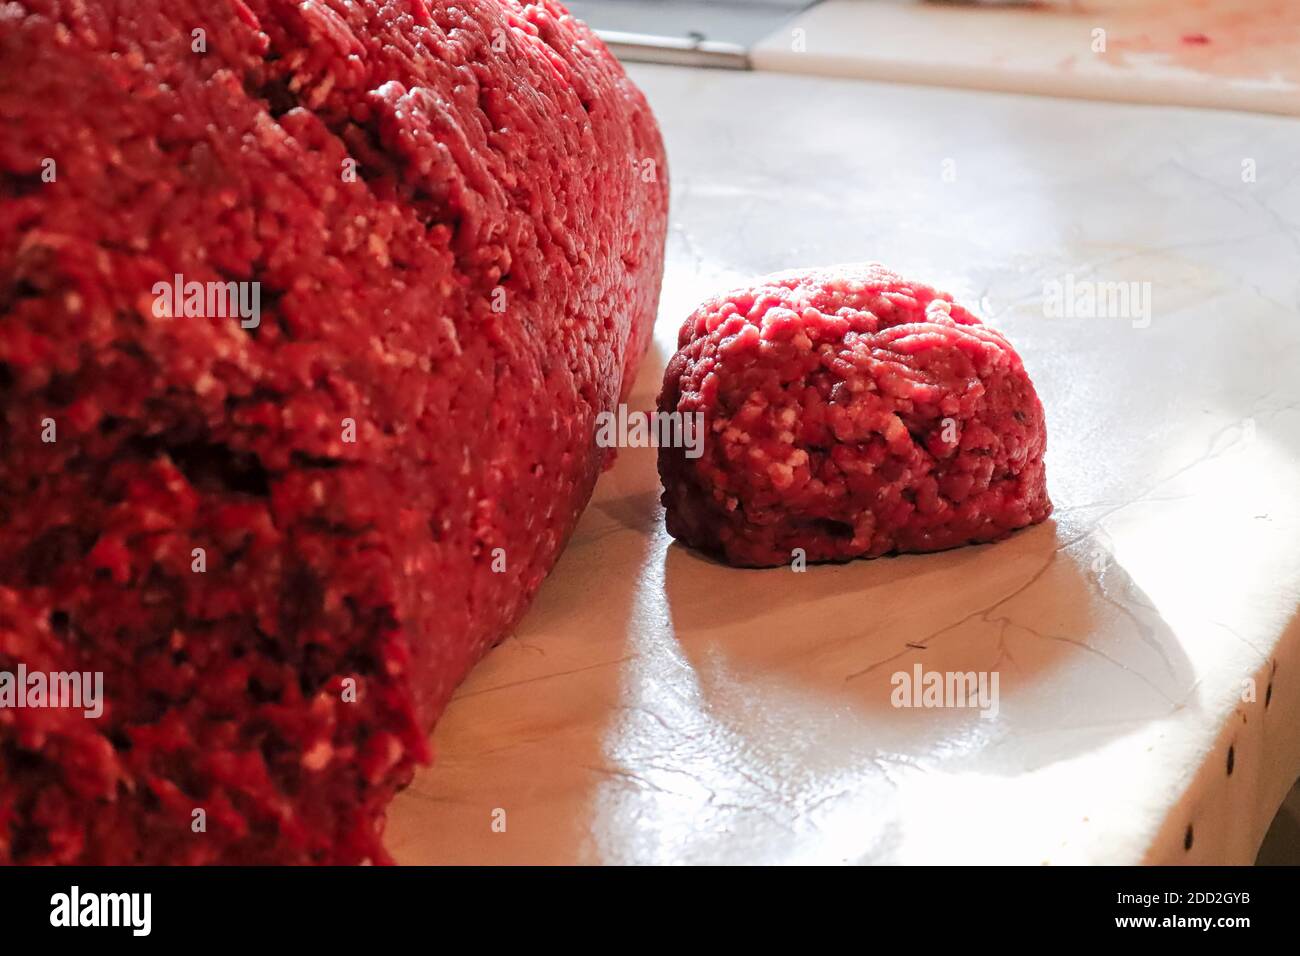 https://c8.alamy.com/comp/2DD2GYB/a-round-of-ground-meat-seperated-from-a-large-pile-2DD2GYB.jpg